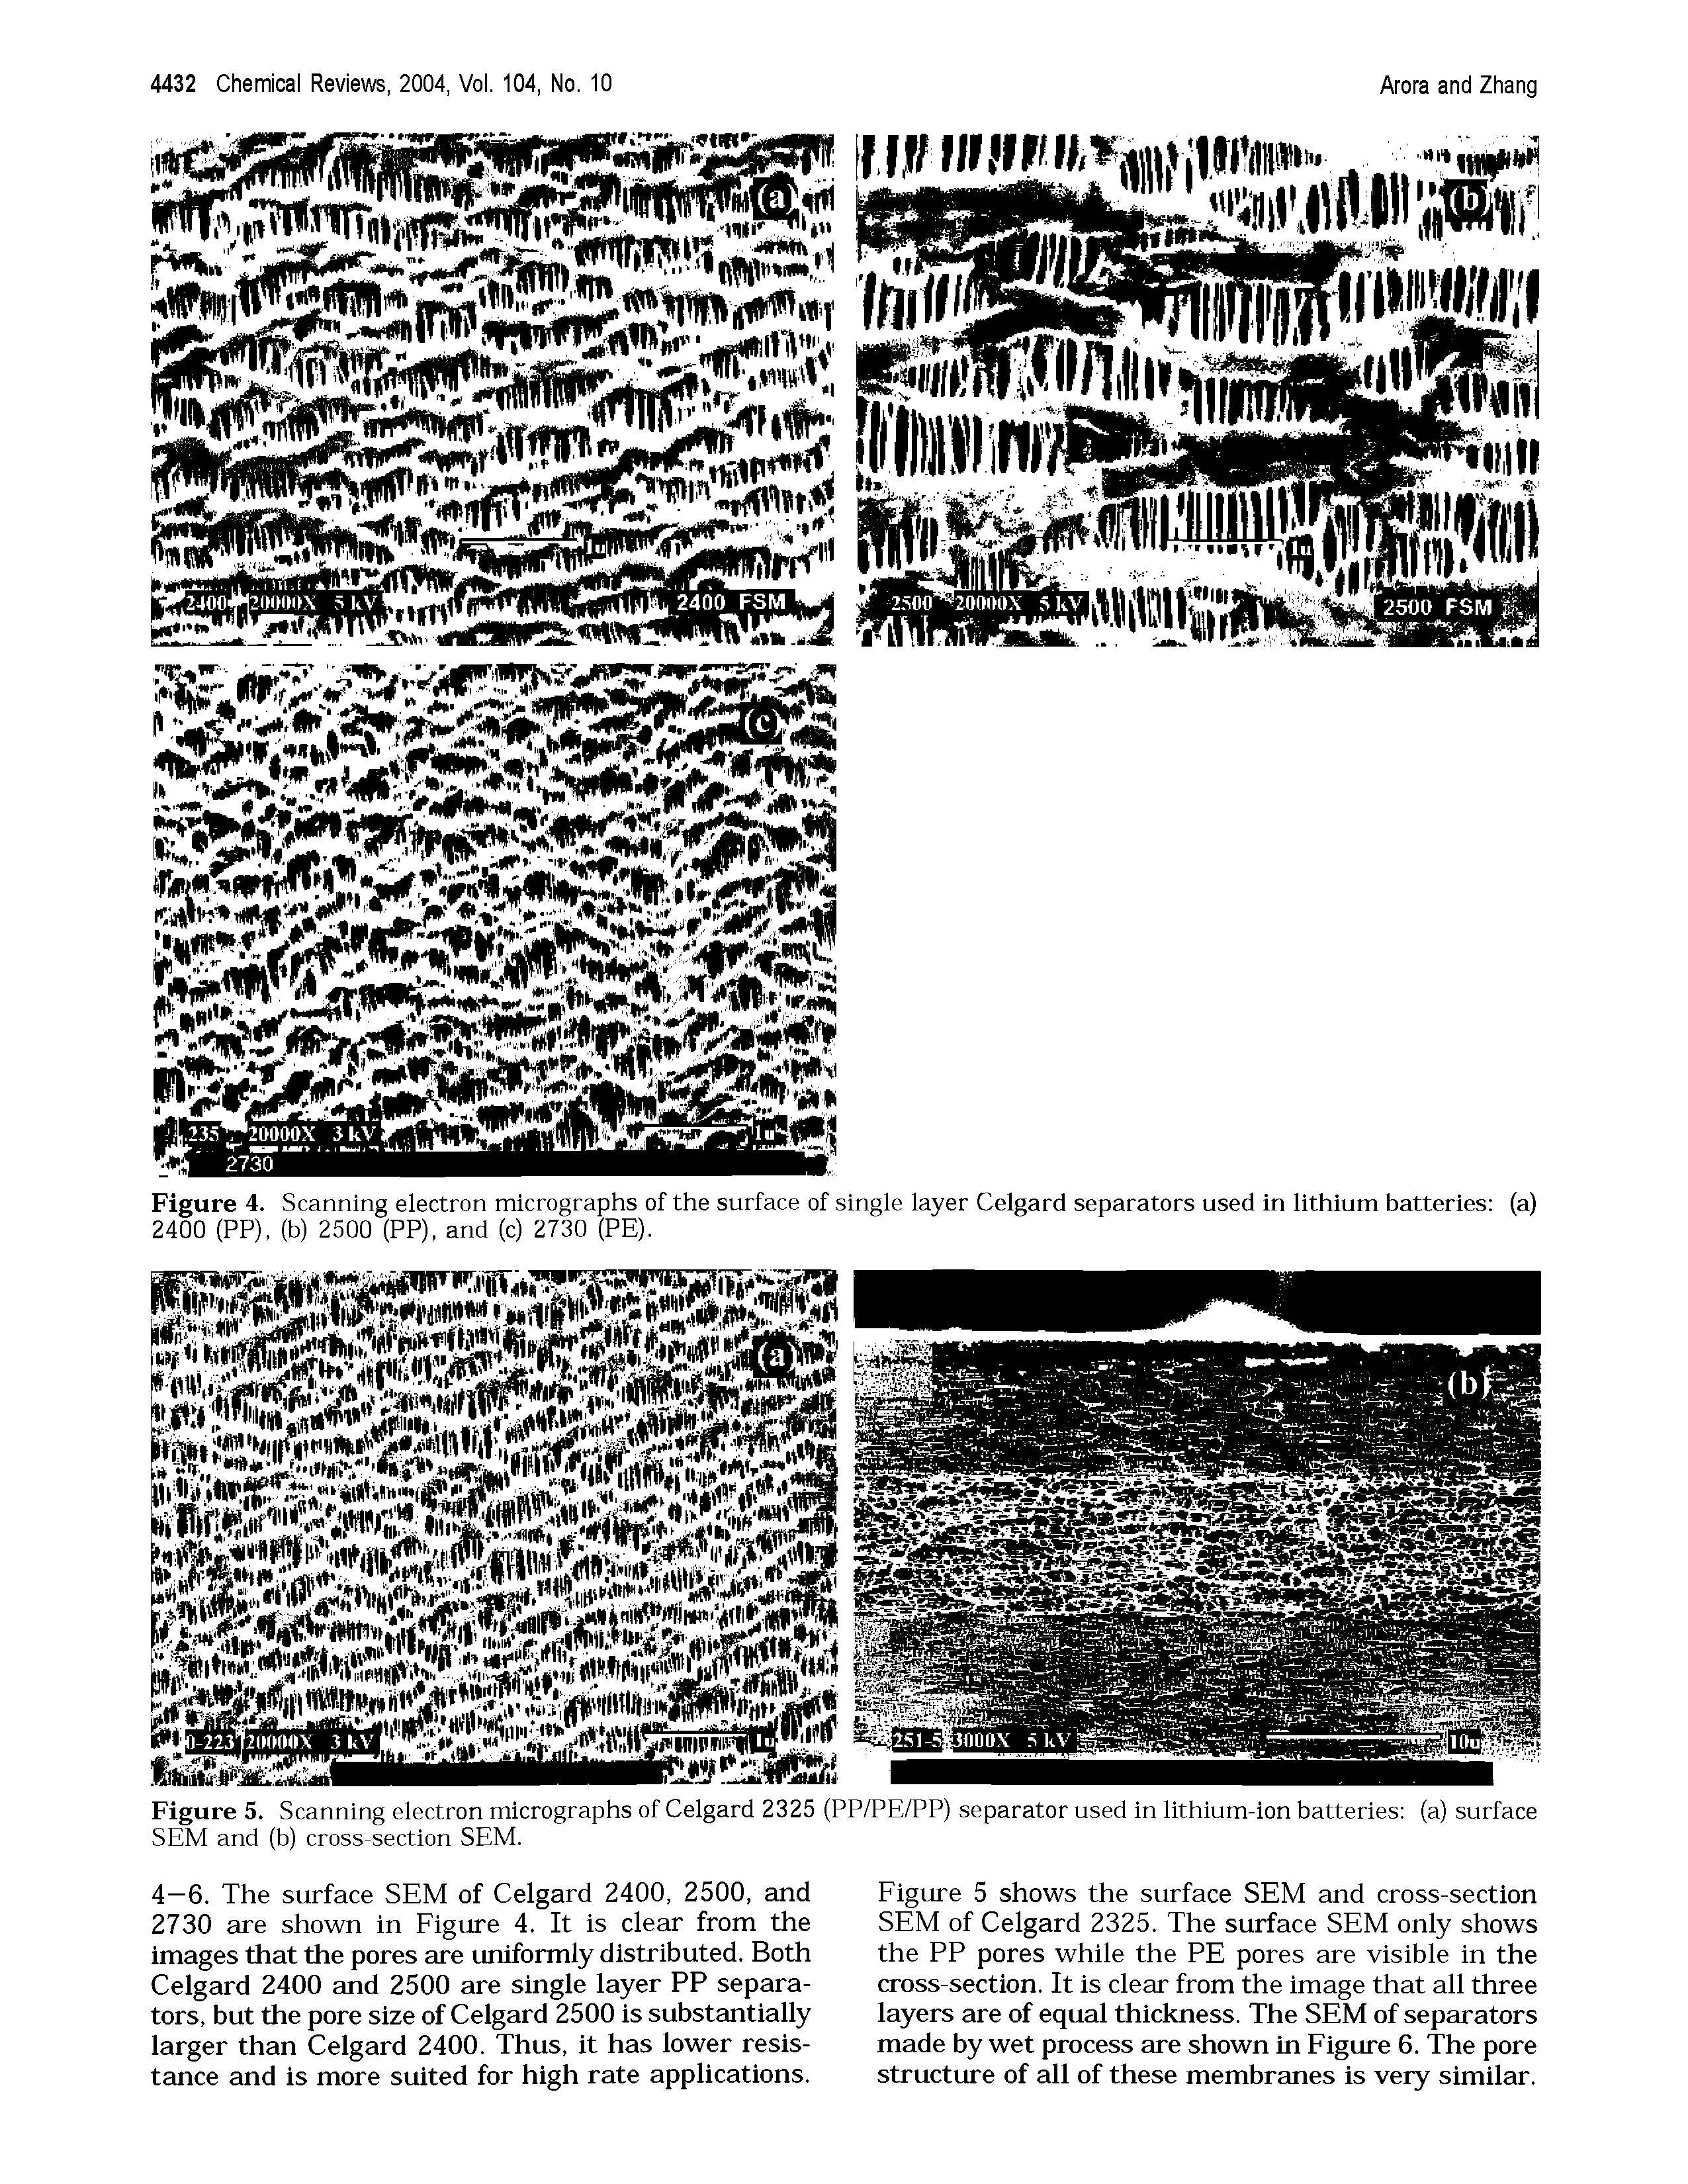 Figure 4. Scanning electron micrographs of the surface of single layer Celgard separators used in lithium batteries (a) 2400 (PP), (b) 2500 (PP), and (c) 2730 (PE).